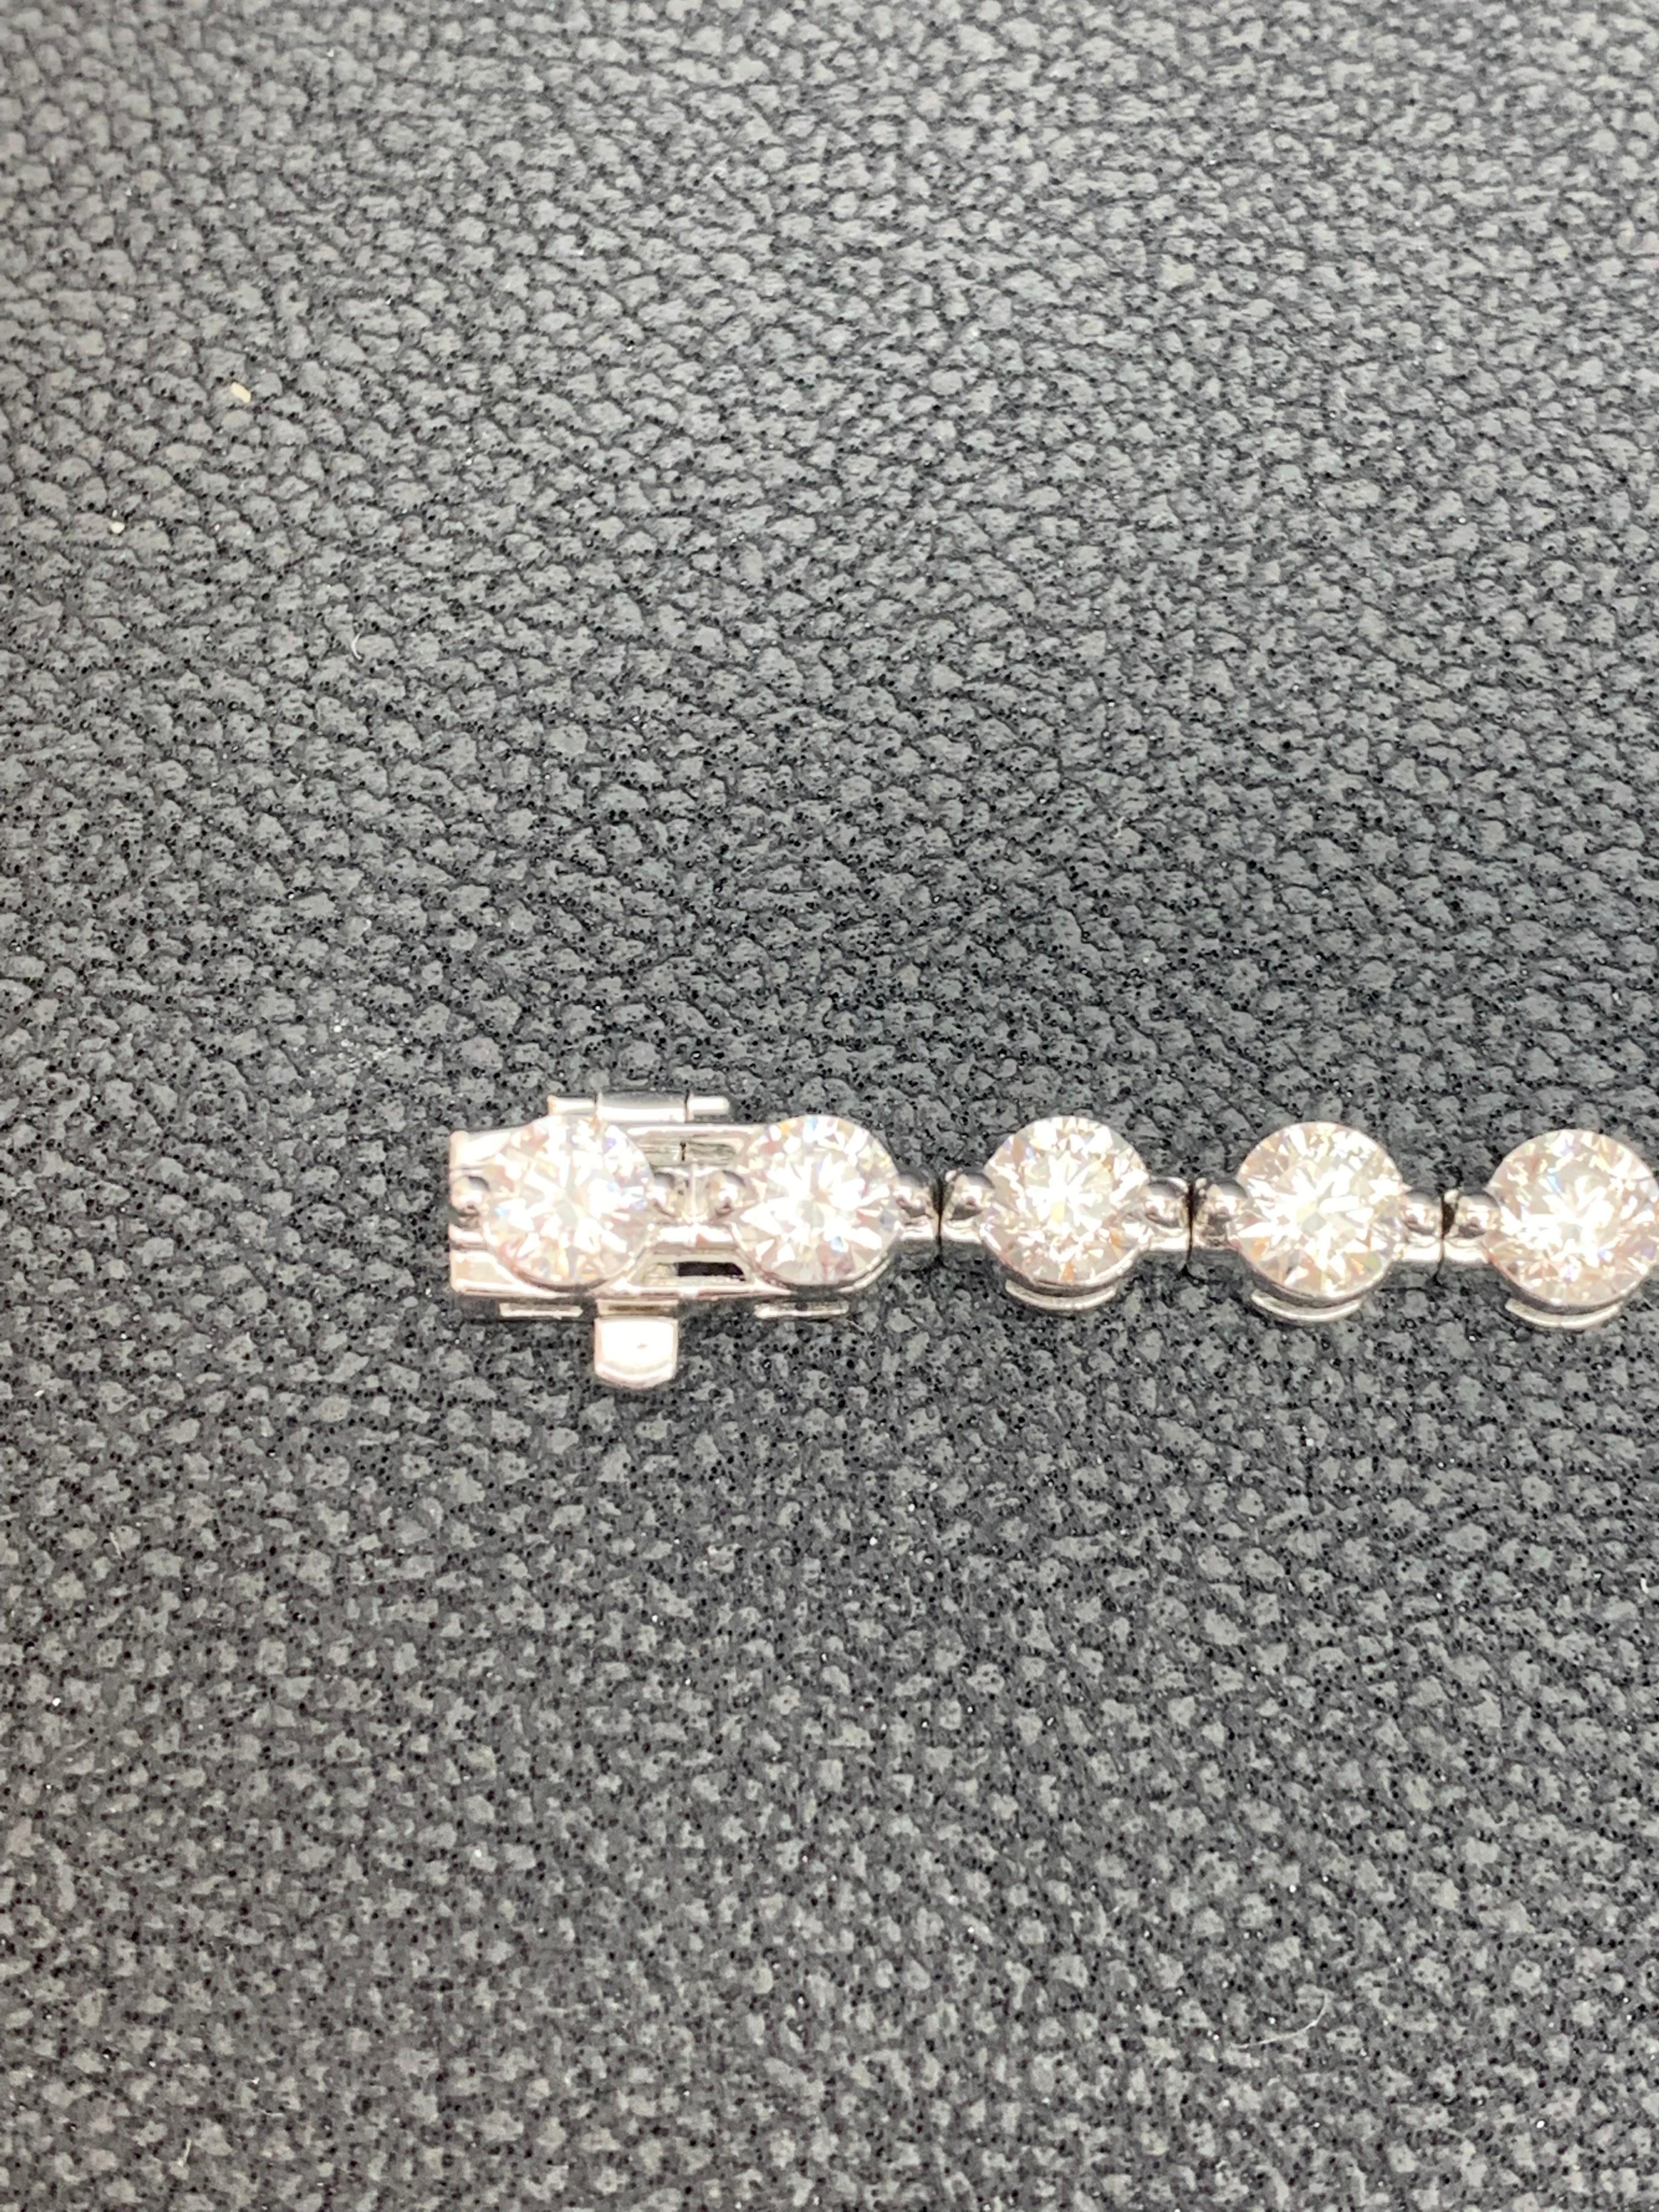 Line bracelet features round brilliant diamonds each set in a 2 prong setting. Total weight of the diamonds is 10.01 carats. Made in 14k white gold. Approximately 7 inches in length.
